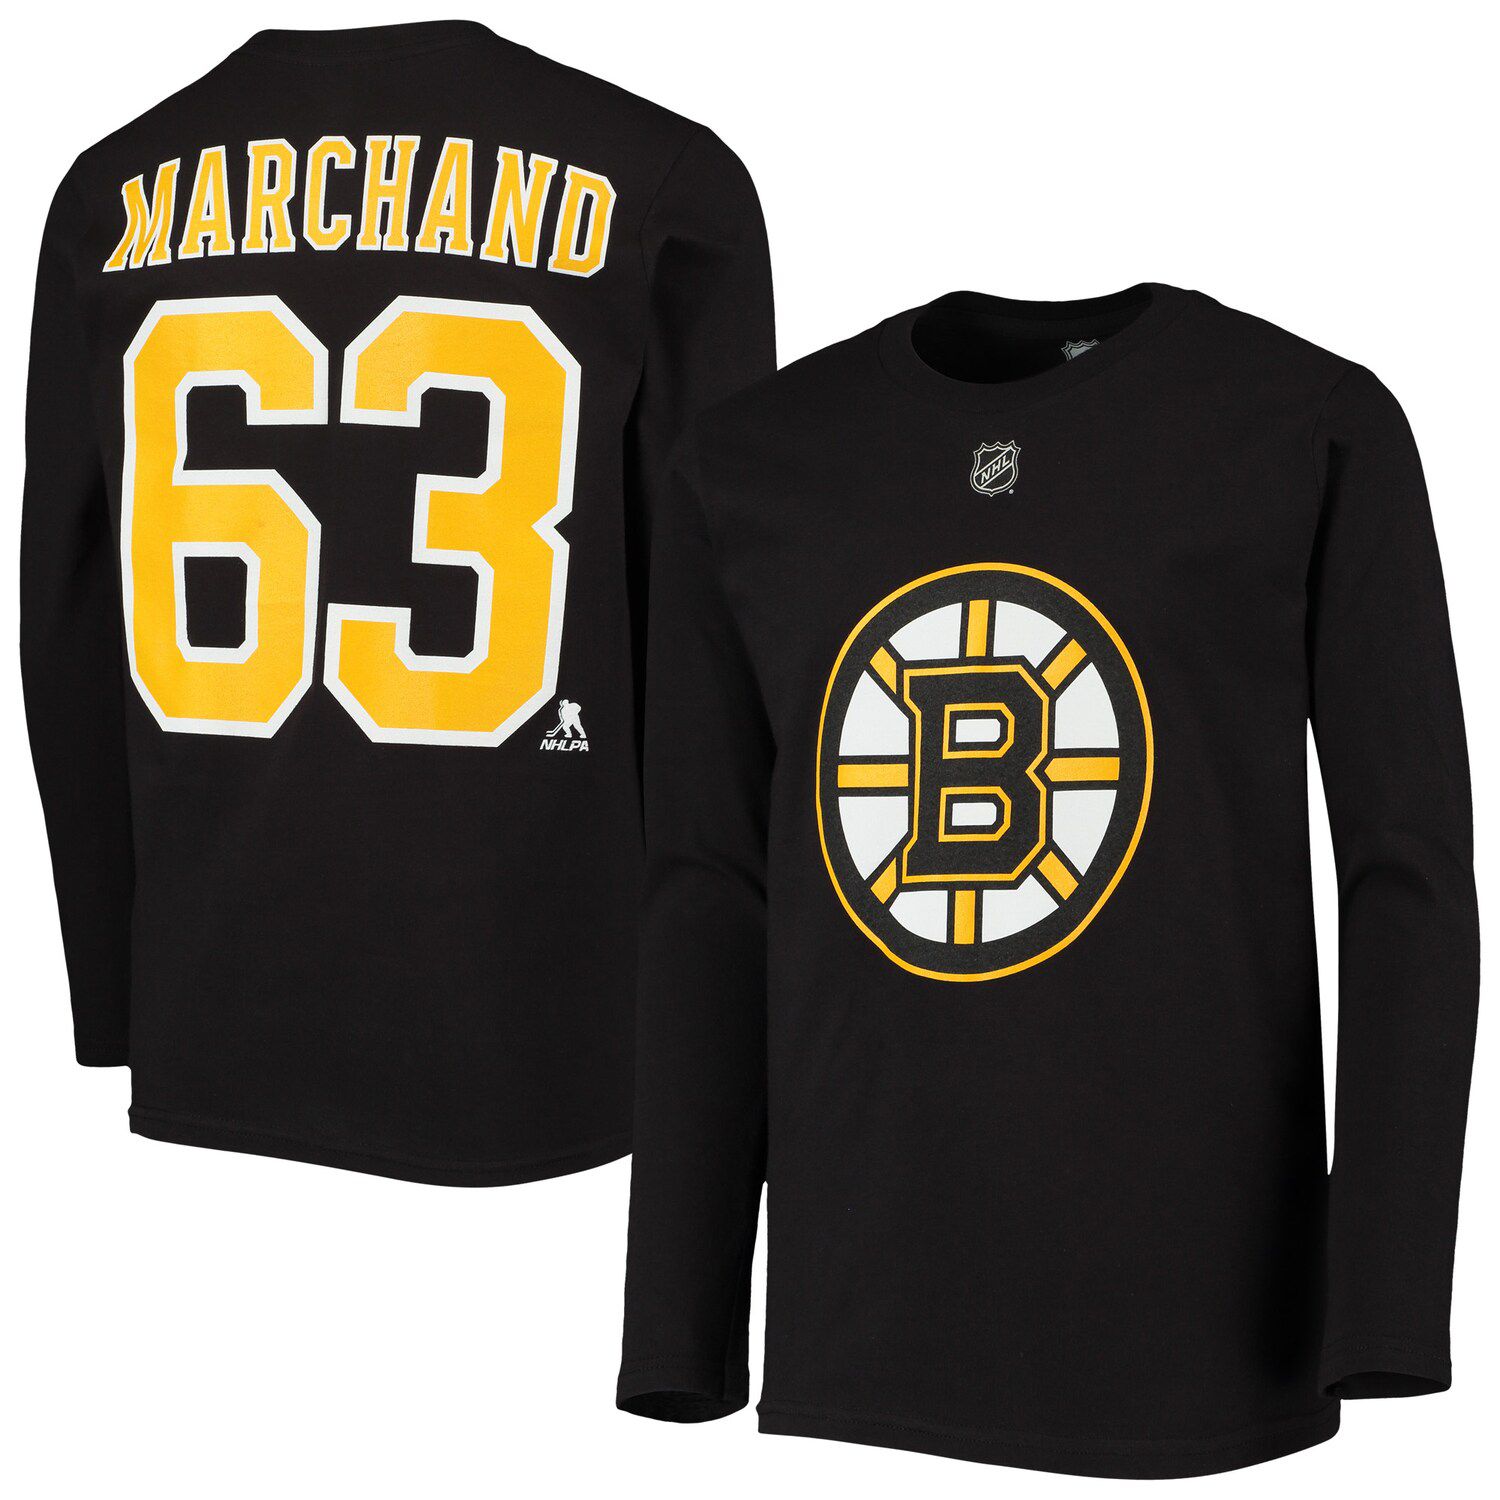 bruins youth jersey